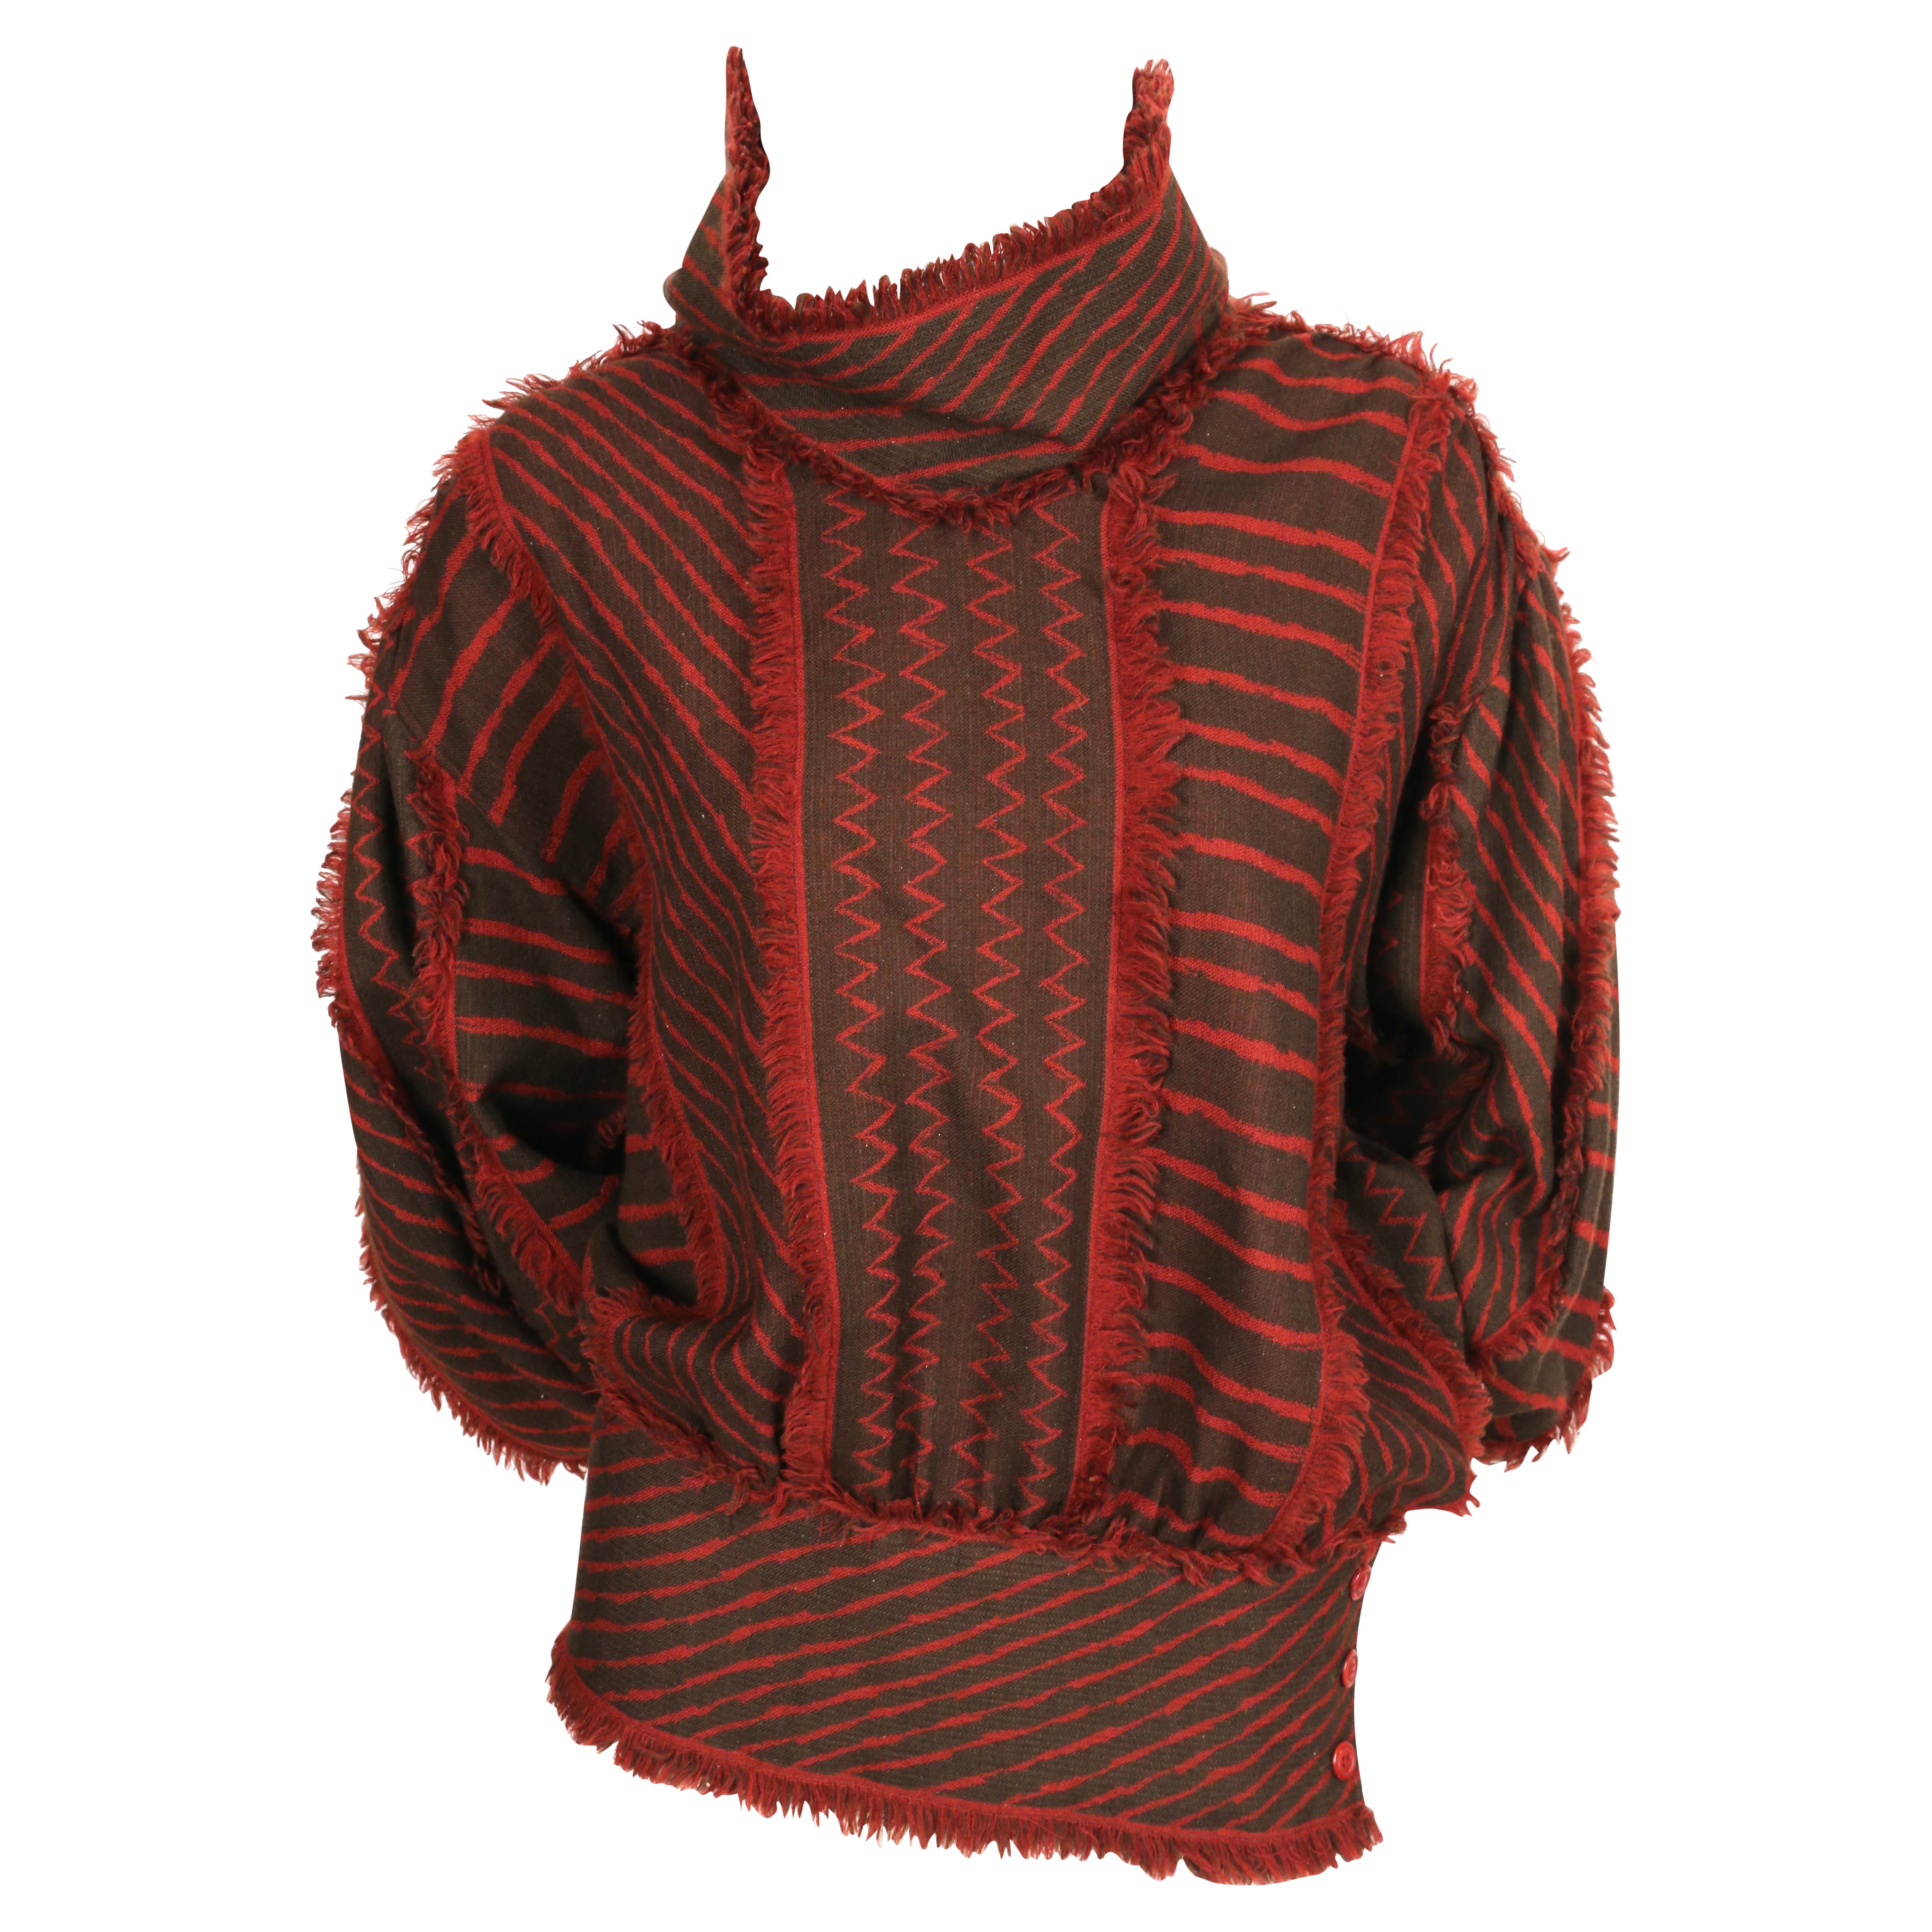 1982 ISSEY MIYAKE African Samurai style tunic in woven mudcloth For Sale